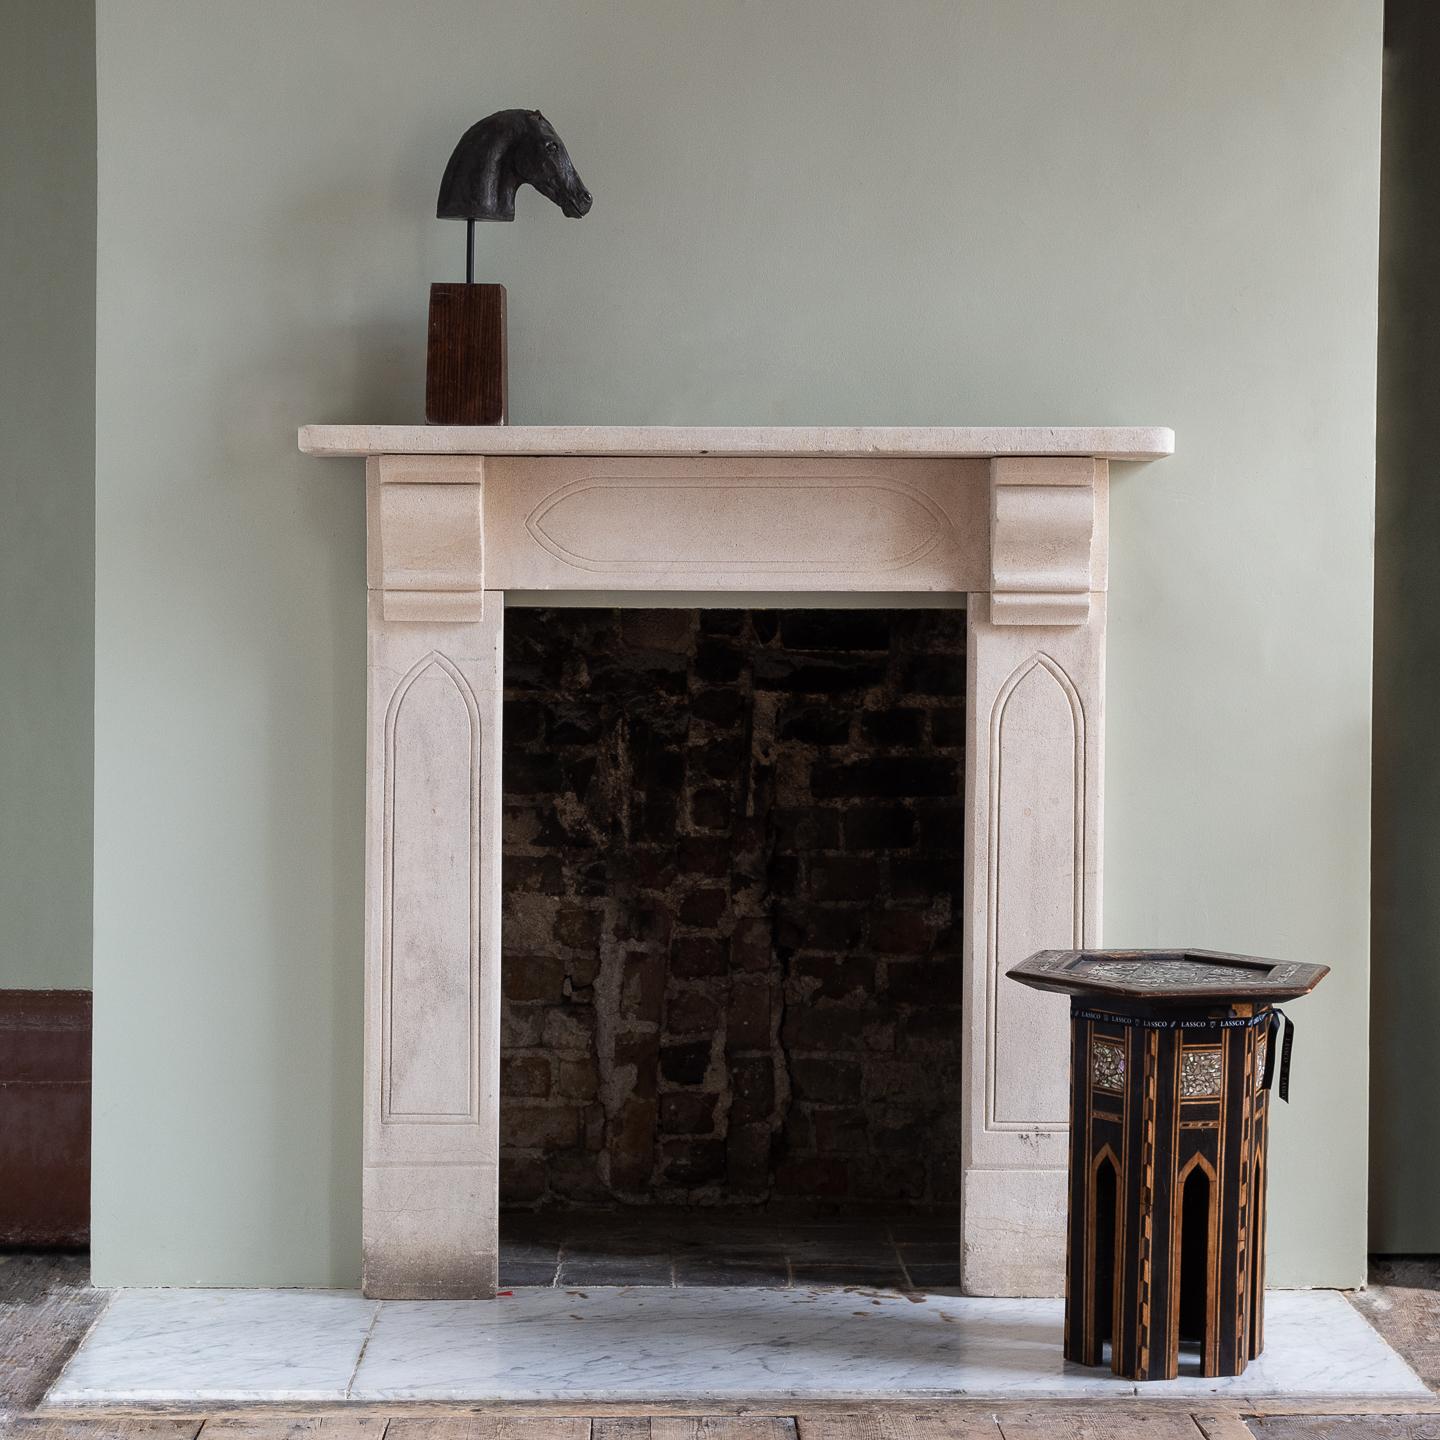 Late Regency Gothik bathstone chimneypiece, with incised lancet motif to the corbelled jambs and frieze. Measures: Opening width 61 cm x 93 cm high.